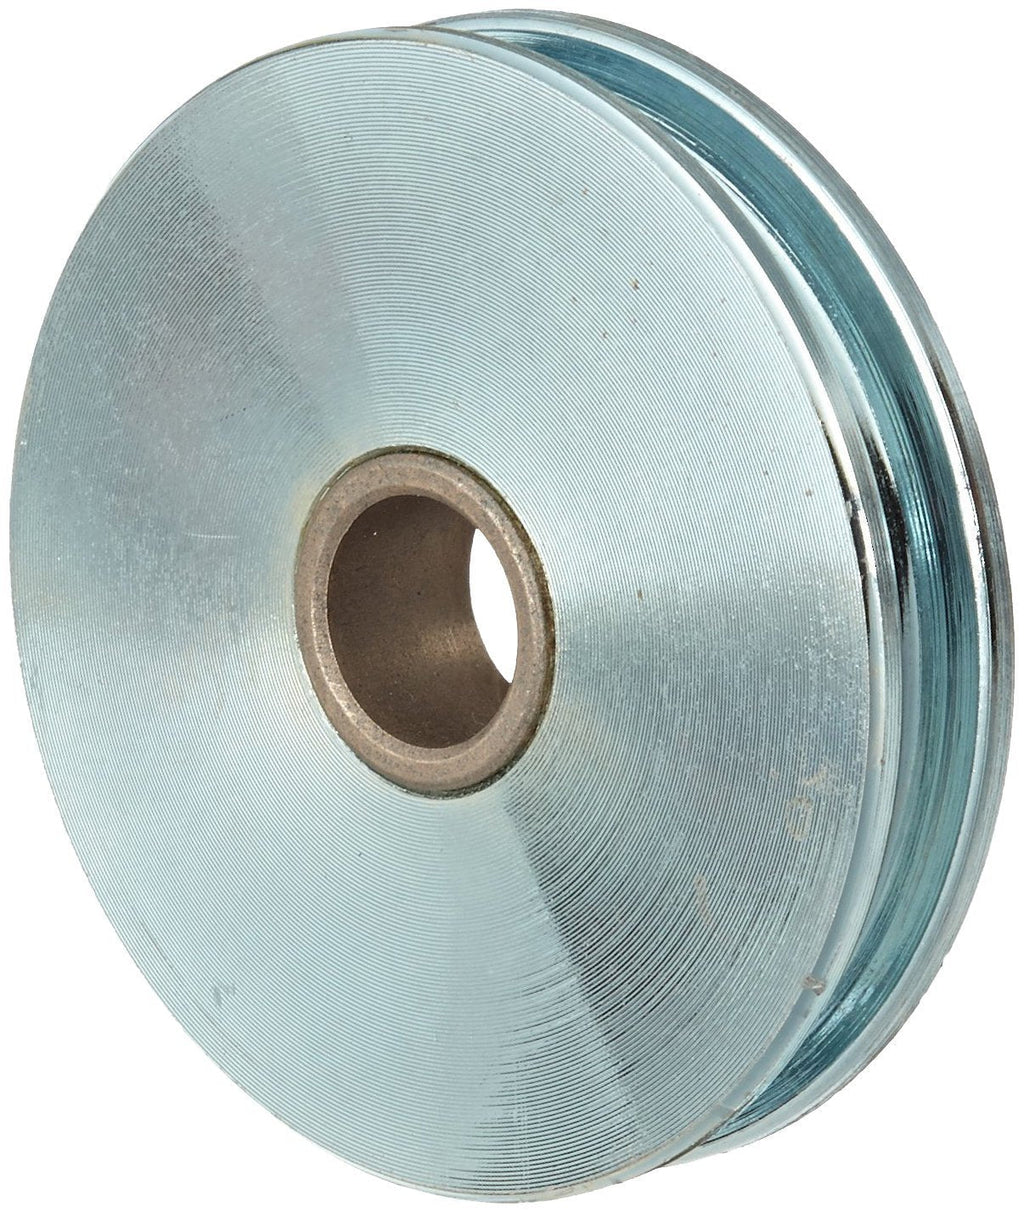 Indusco 75700011 Zinc Plated Steel Replacement Sheave with Bronze Bushed, 685 lbs Working Load Limit, 1/4" Cable Size, 2-1/2" Diameter x 1/2" Bore - LeoForward Australia